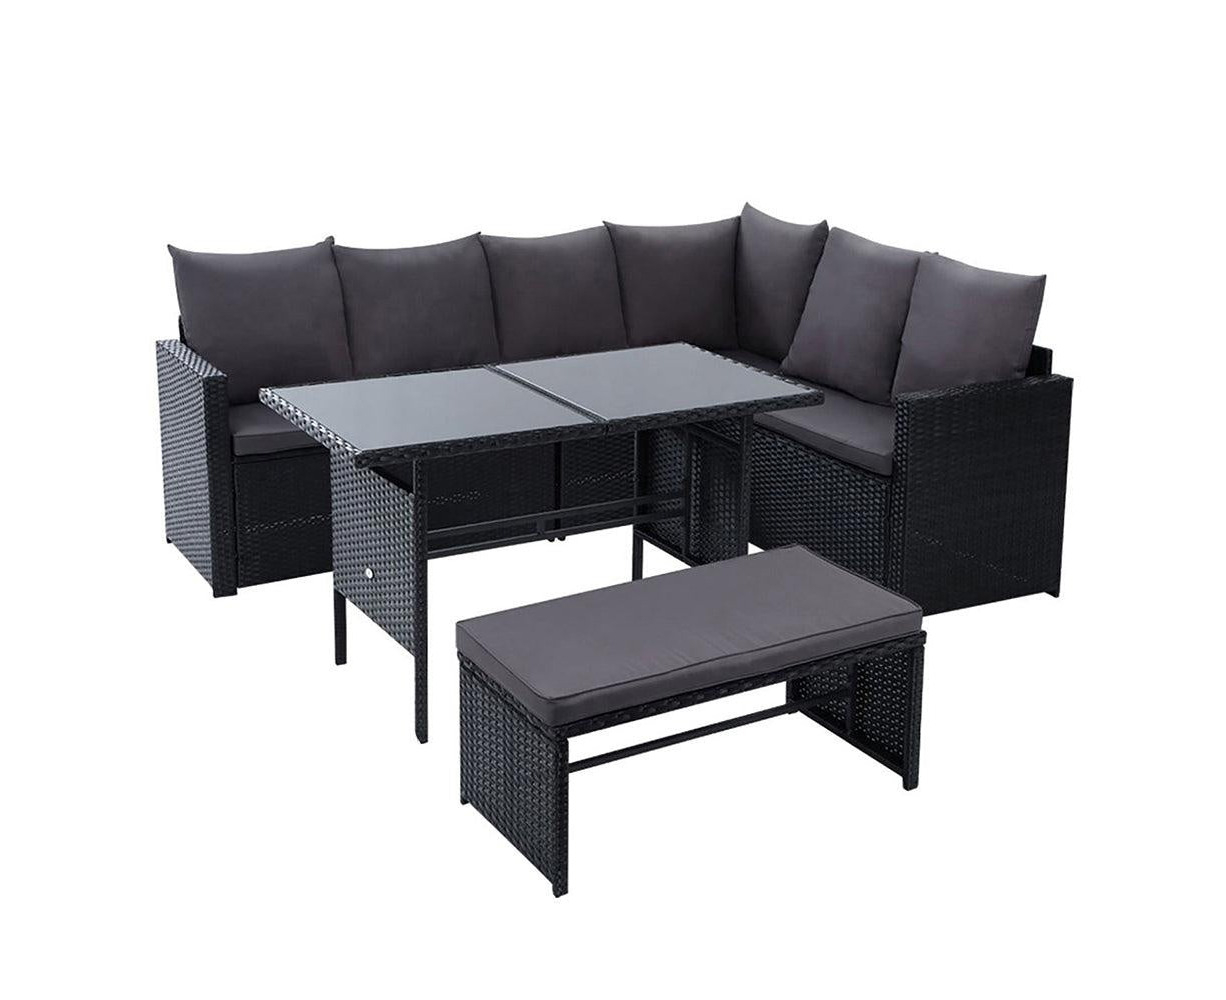 Gray and Dark Gray Great Deal Furniture Leo Outdoor Aluminum V-Shaped Sectional Sofa Set 